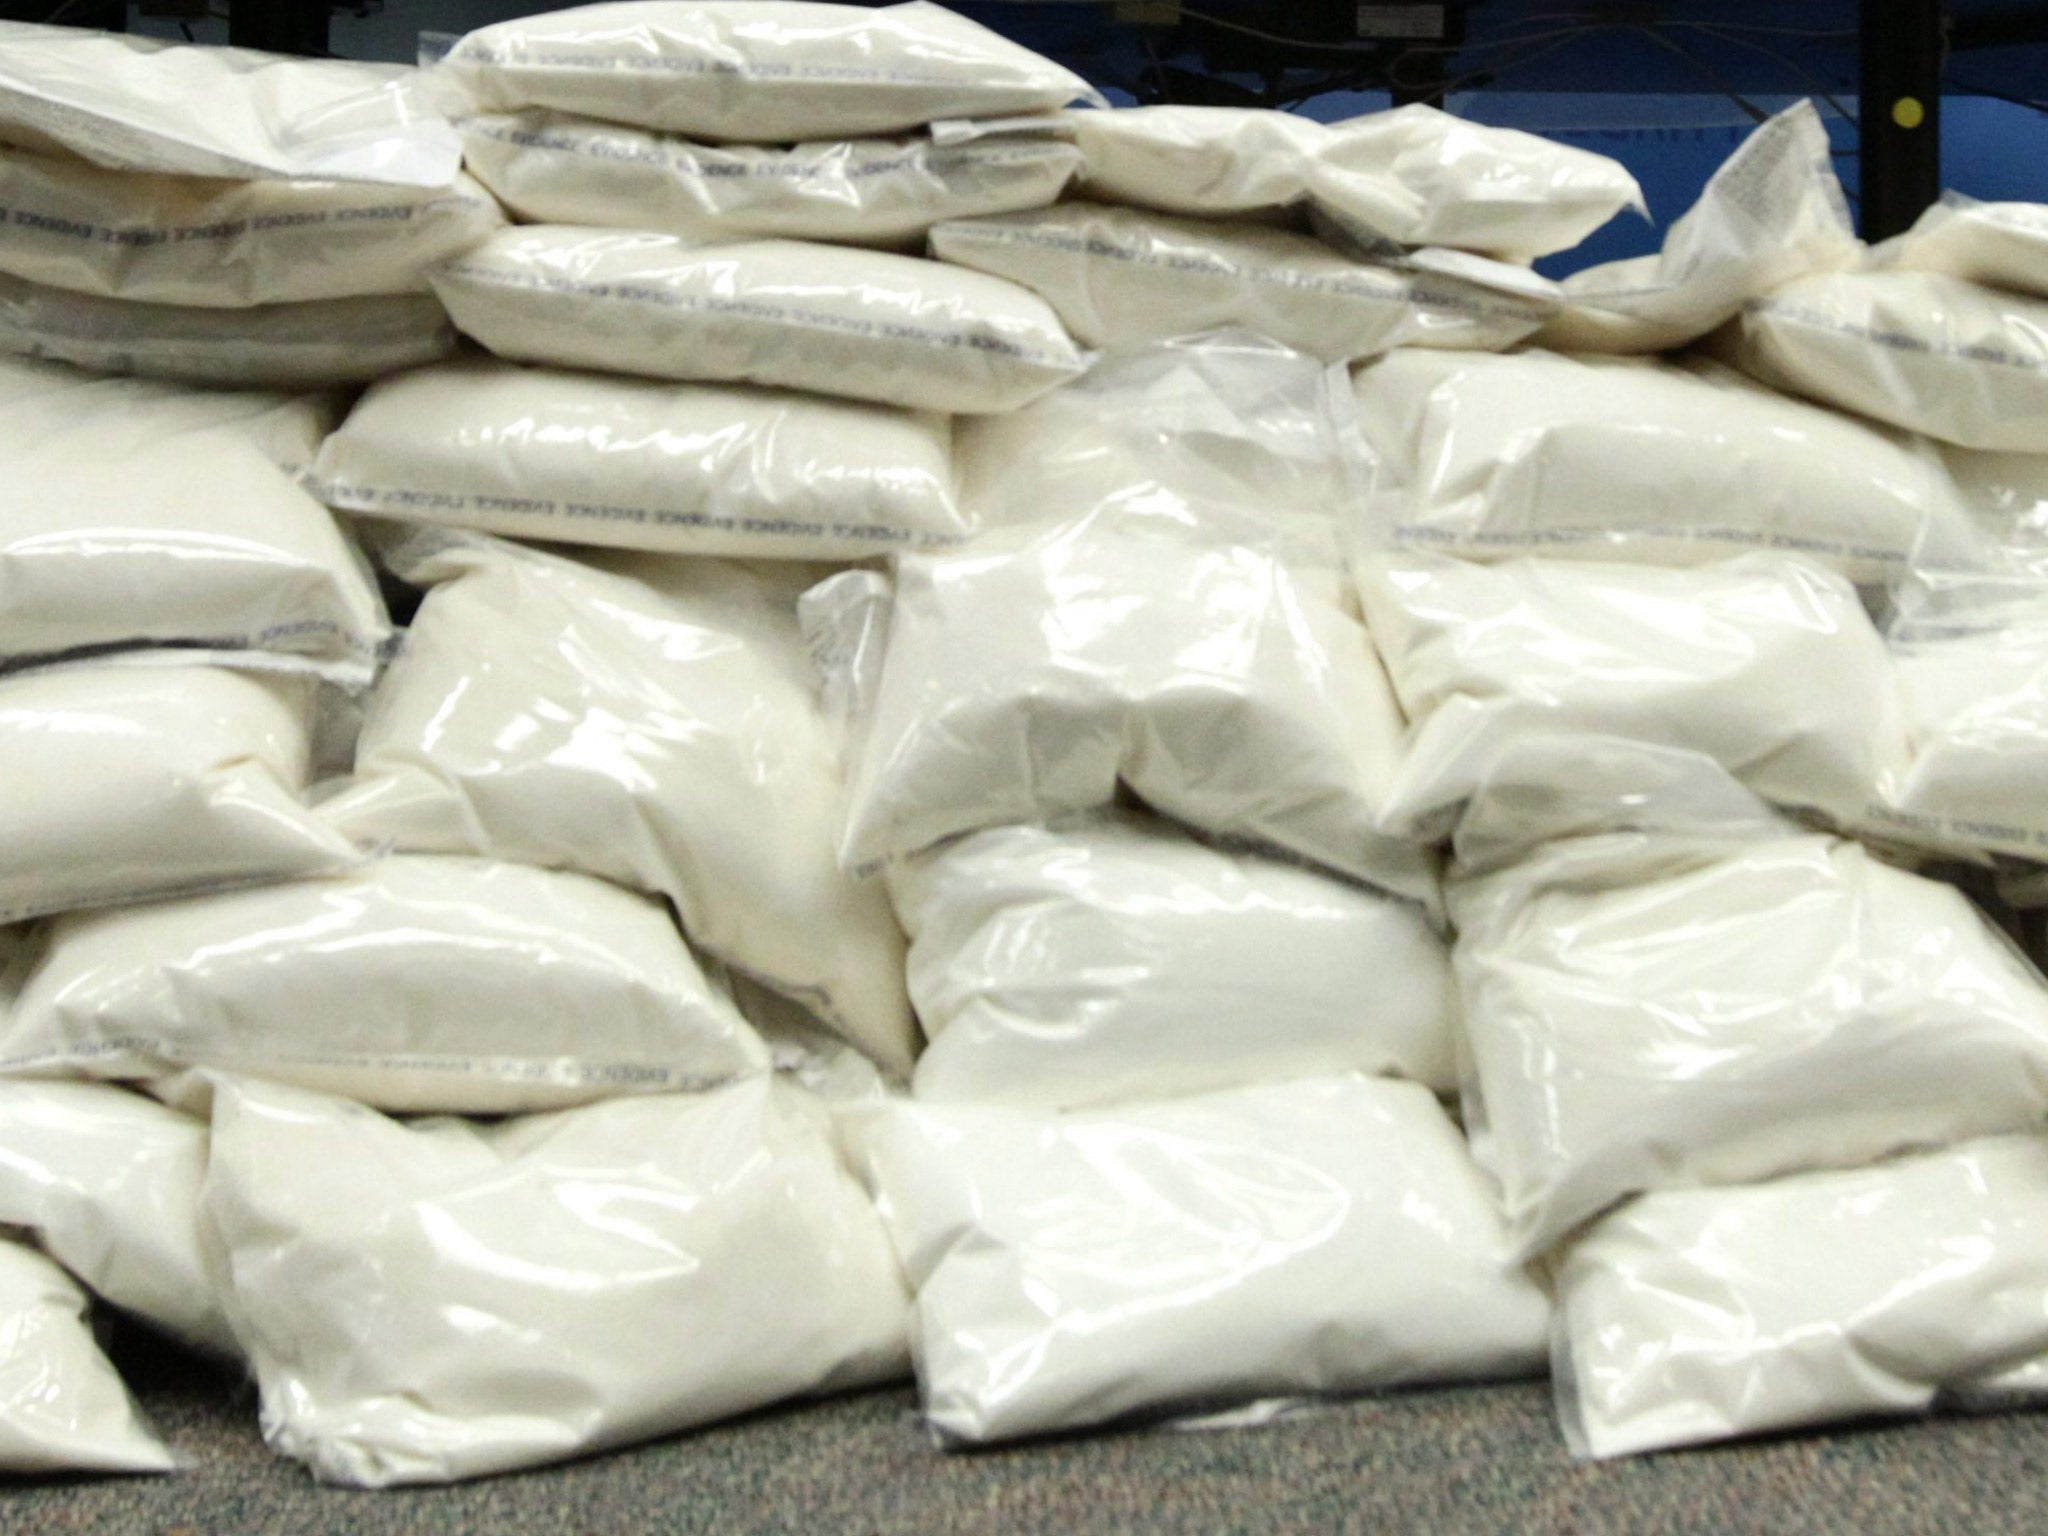 More than 1,000 kg of ketamine was seized by Canadian authorities in 2011